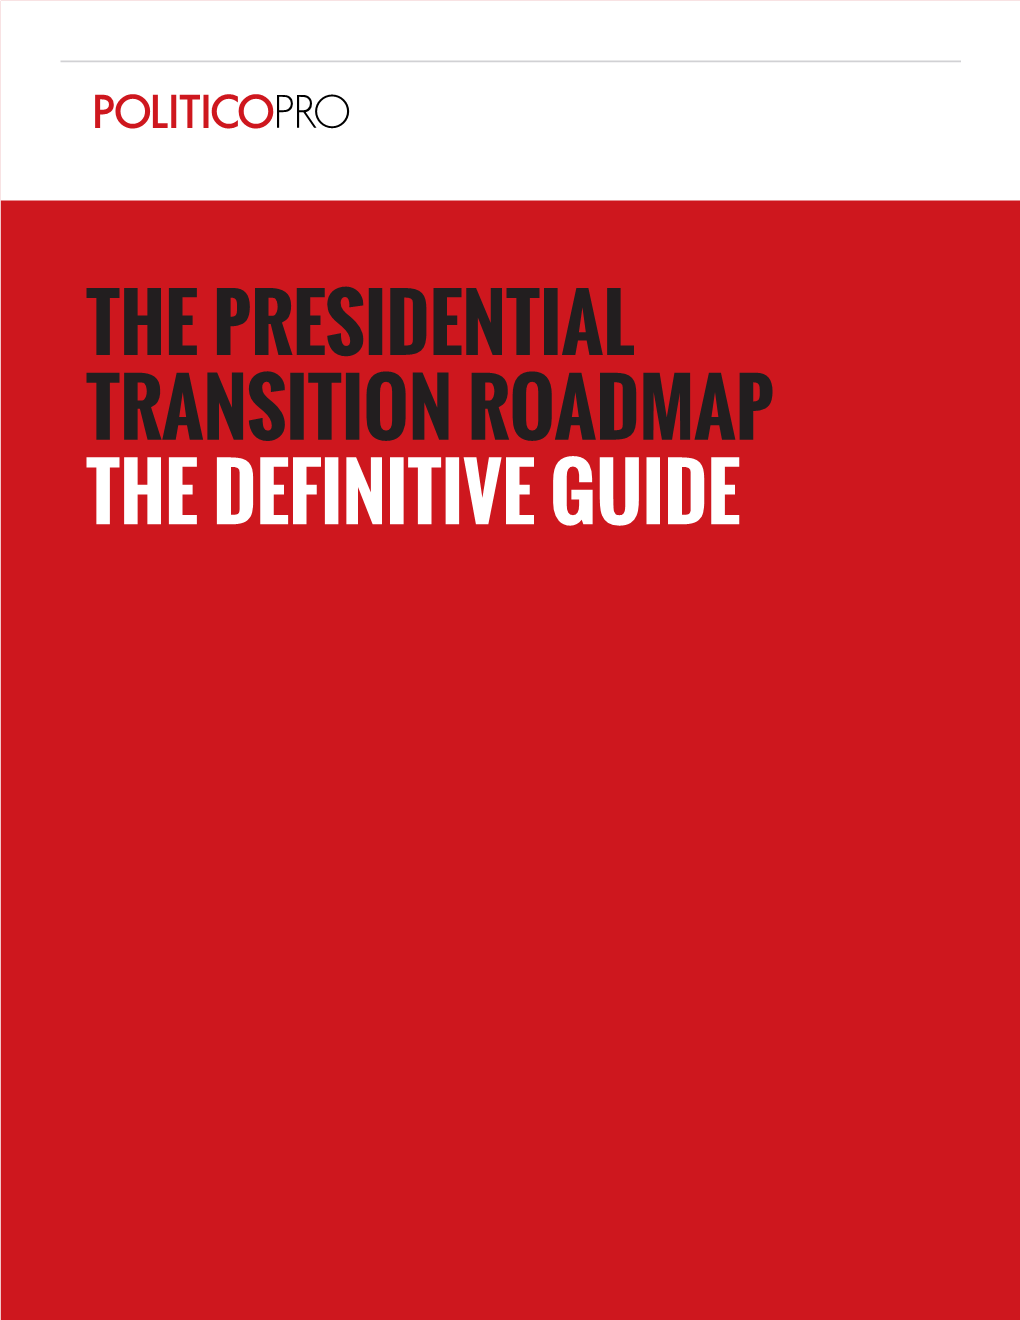 The Presidential Transition Roadmap